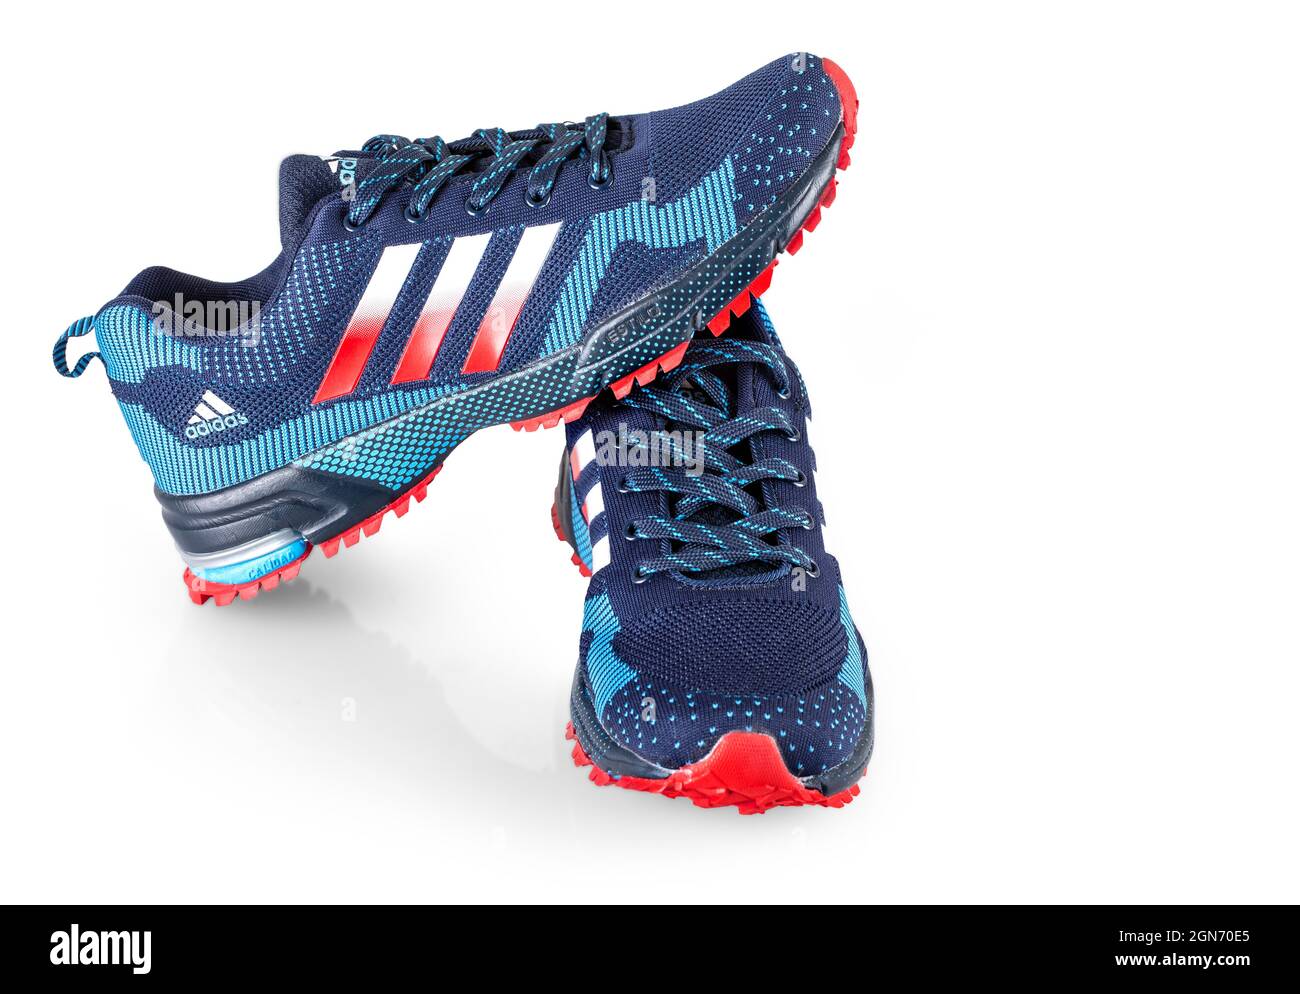 Blue Adidas Running Sneakers. Adidas, Germany company. Isolated on white  Stock Photo - Alamy